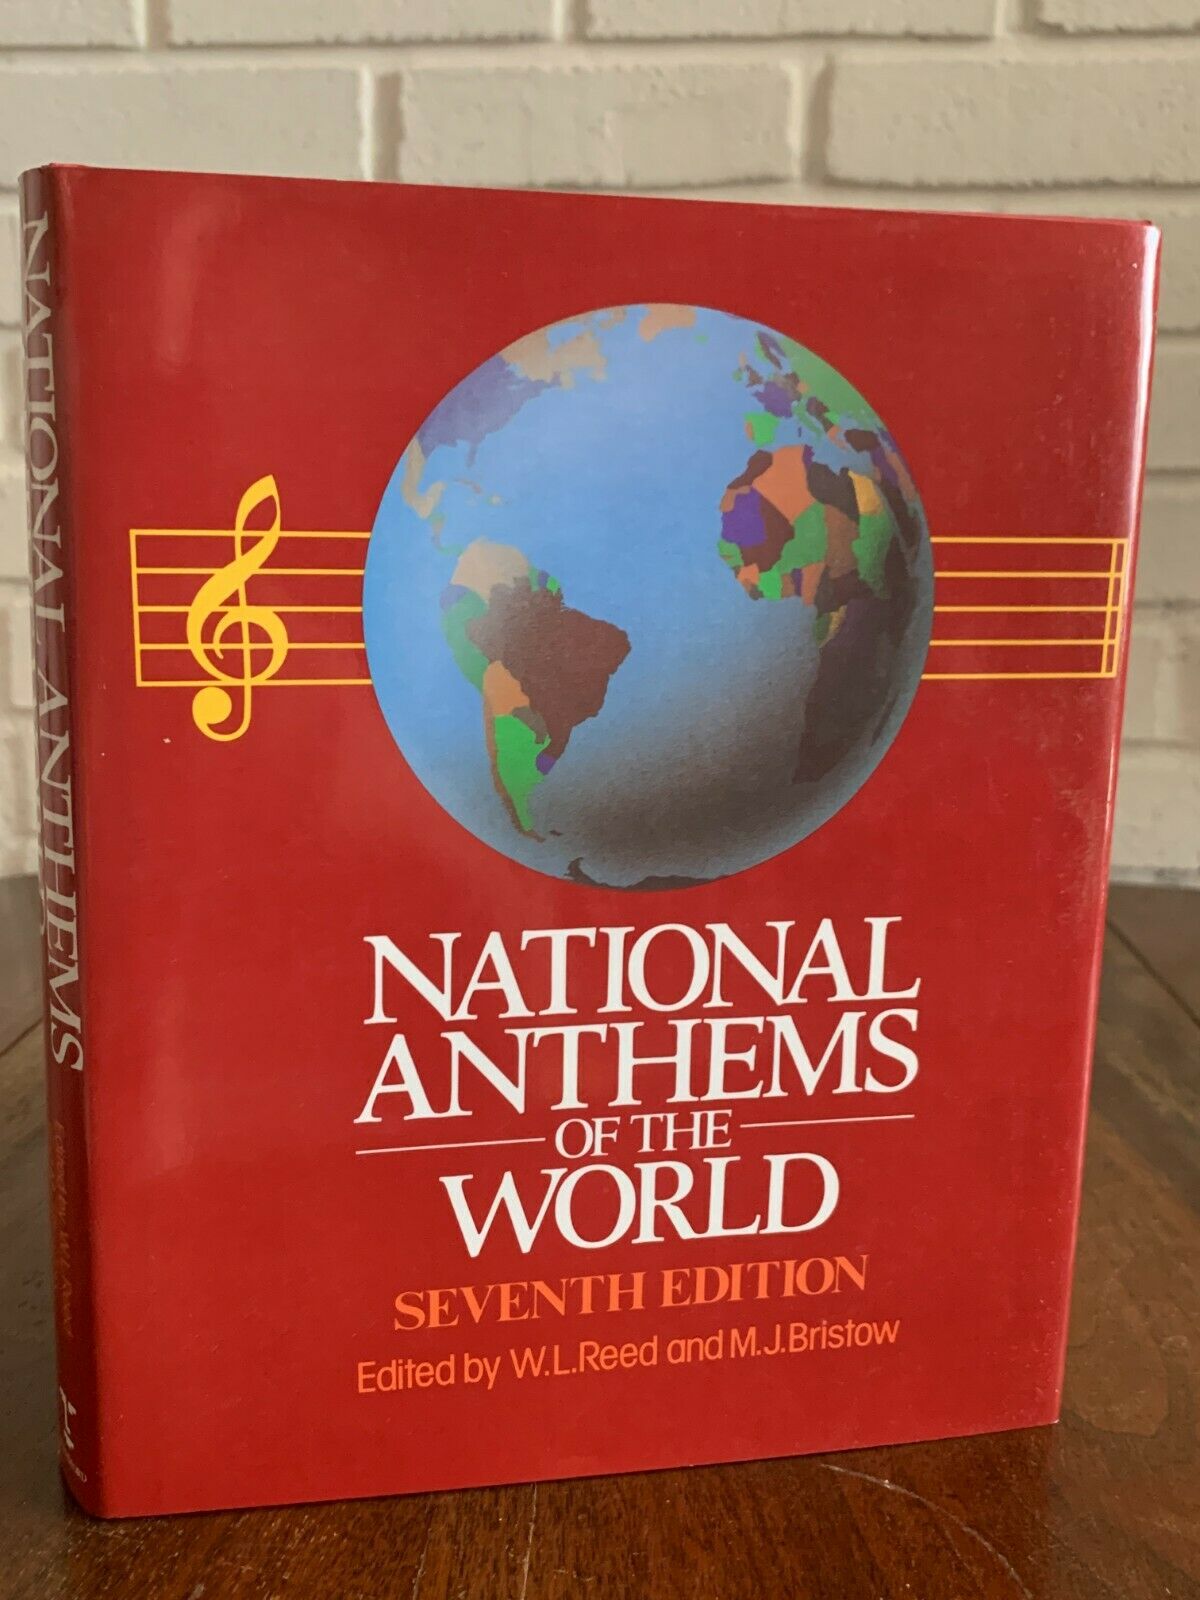 National Anthems of the World by W.L. Reed & M.J. Bristow [1989 · 7th Edition]